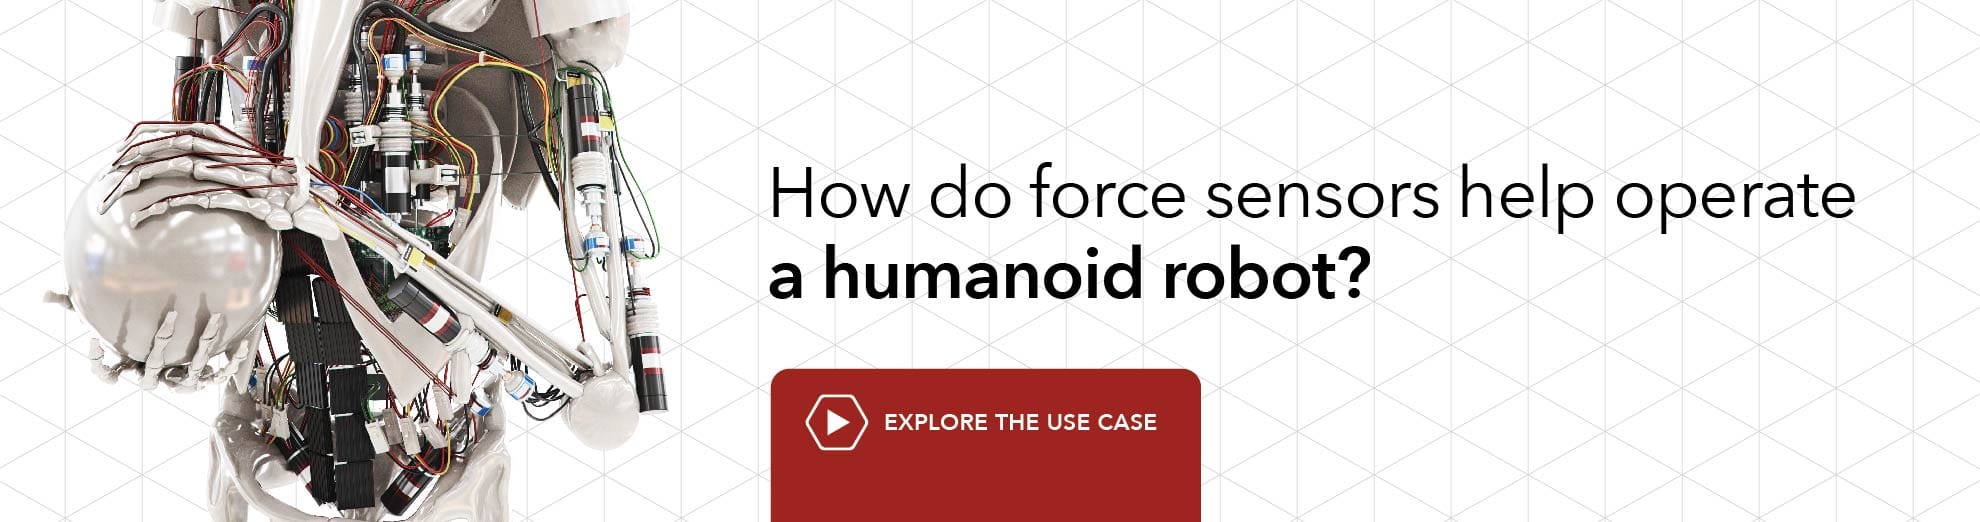 How do load cells help operate a humanoid robot? Explore the use case